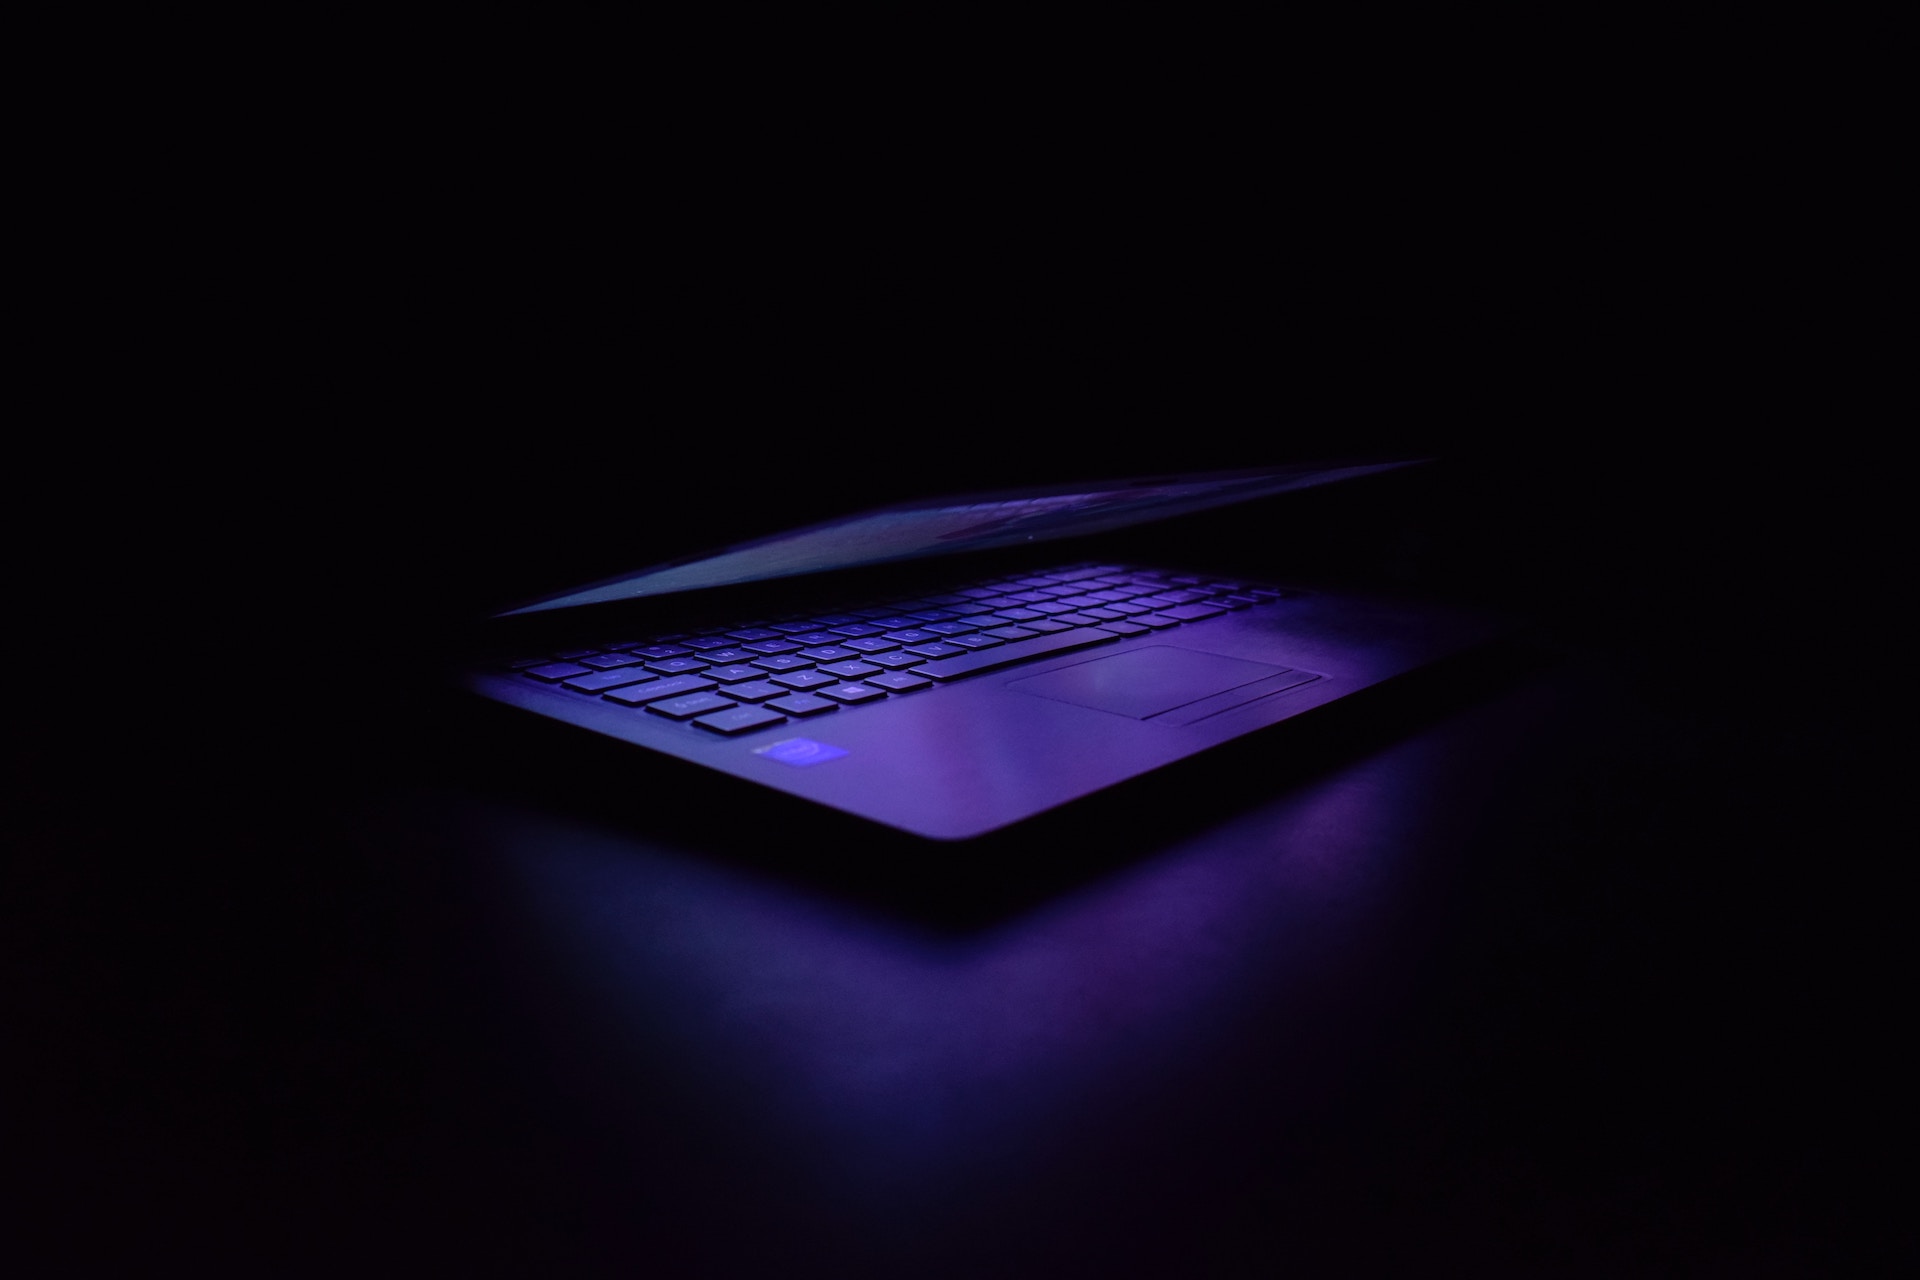 laptop half closed with purple light shining against a dark black background